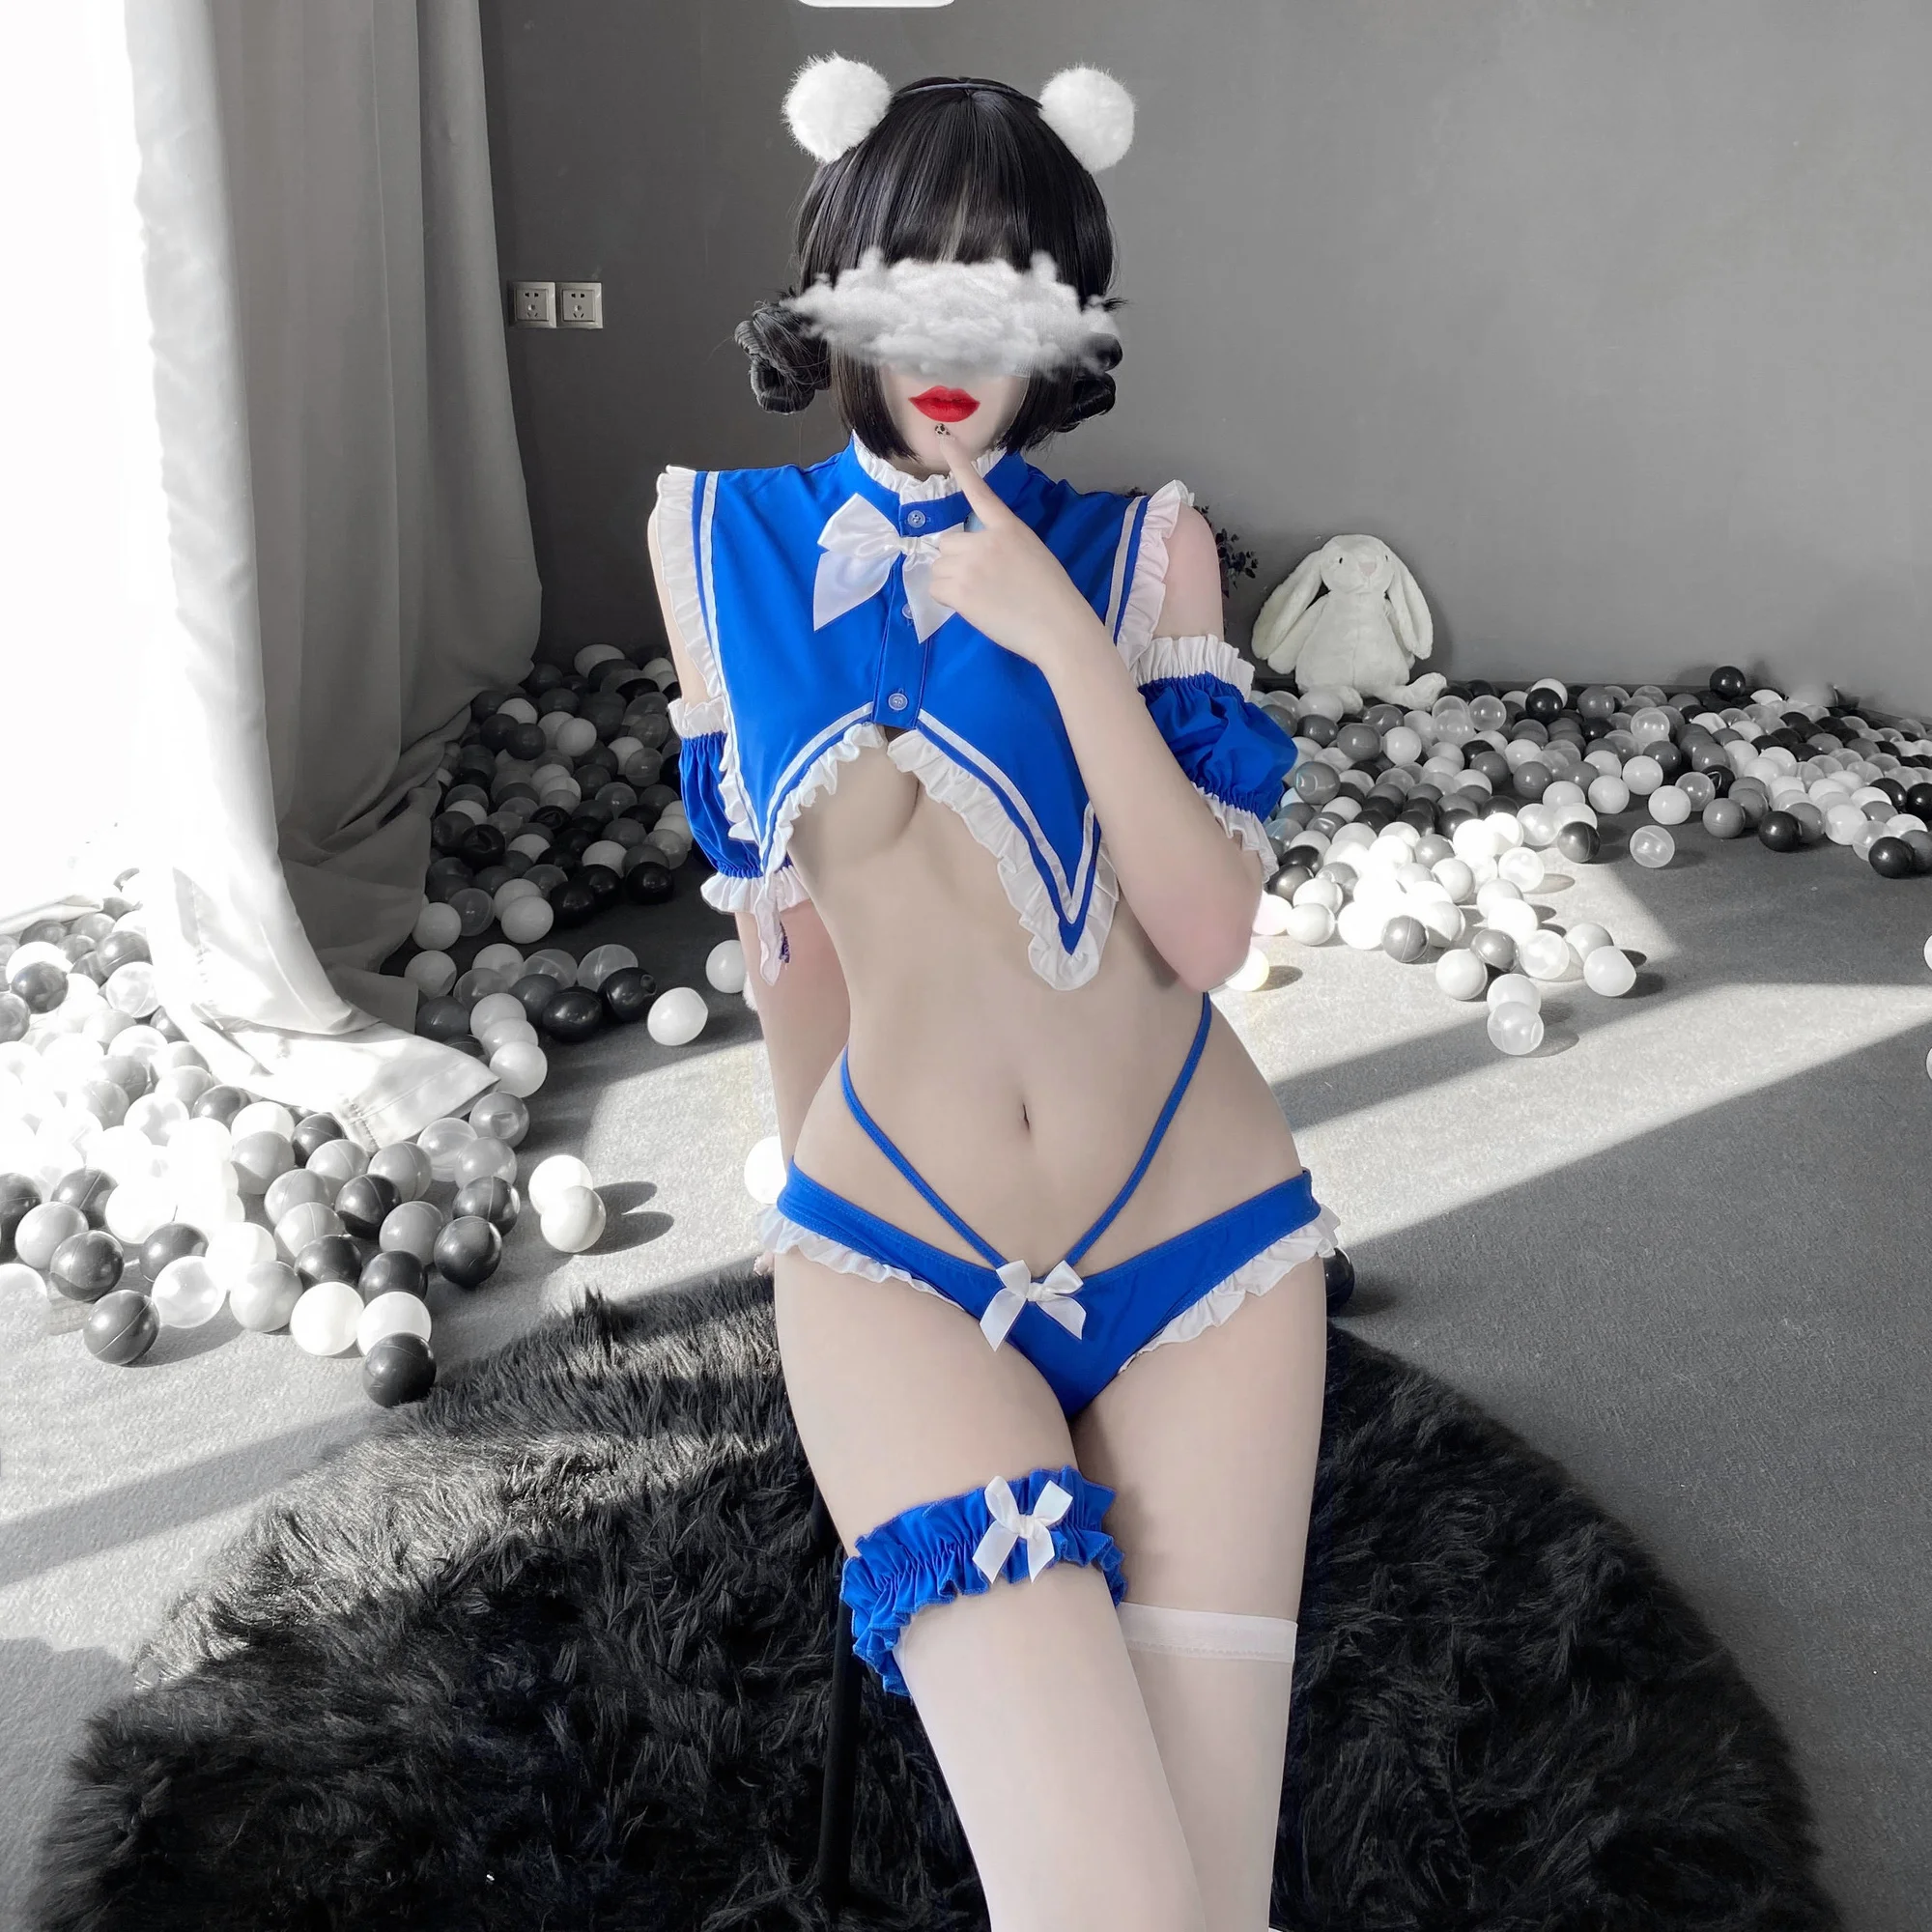 

Sexy Bunny Girl Cosplay Uniform Temptation Lingerie Bow Lace Short Top Nightwear Feamle Role-playing Outfits Erotic Porno